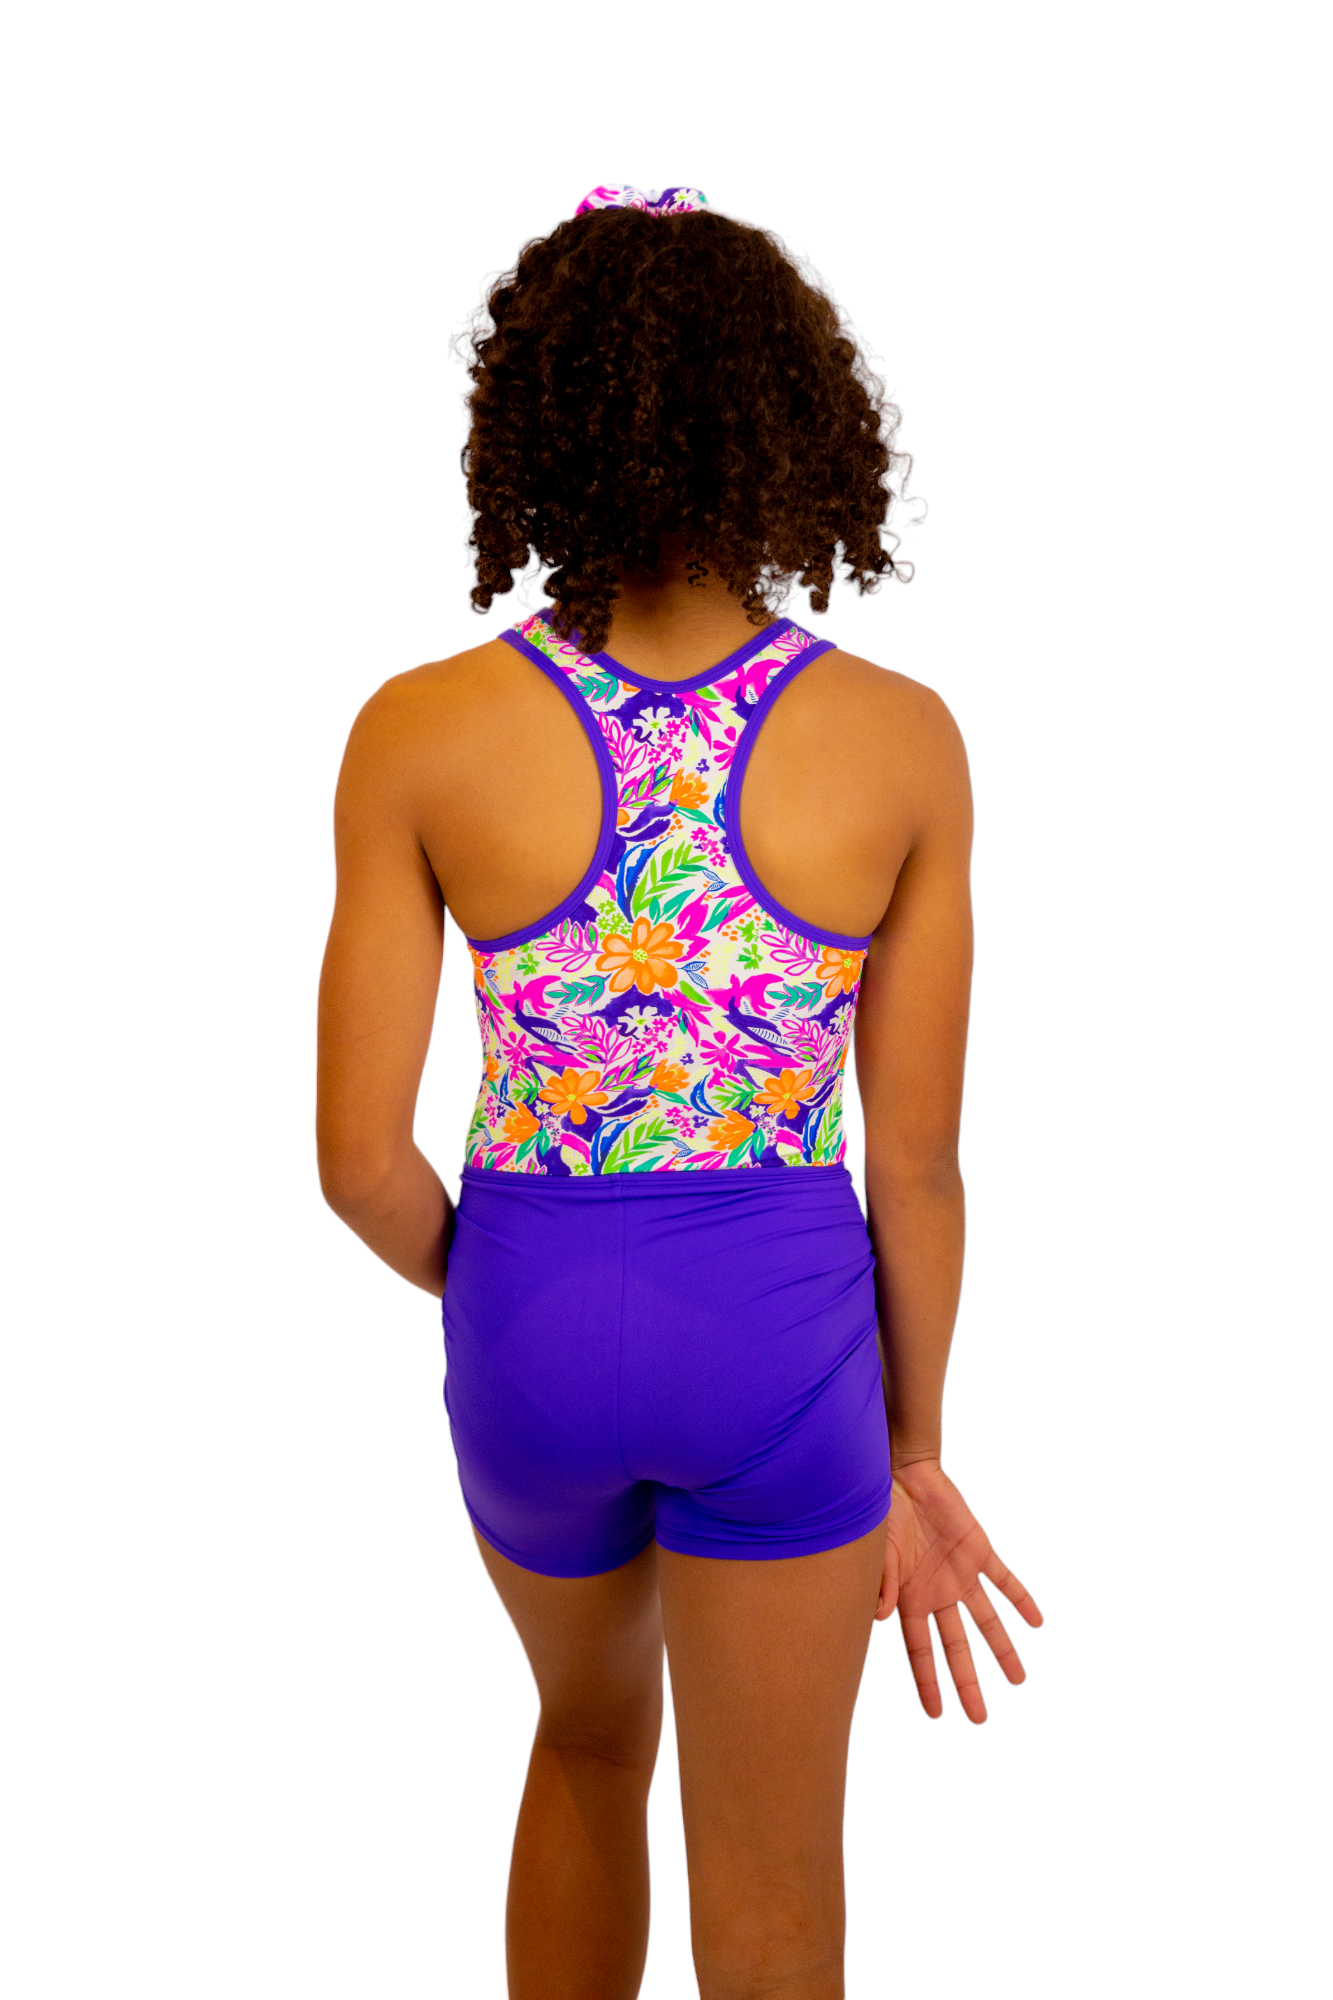 Purple Bike Shorts for Girls. Bike Pants, Gymnastics Leotards, Two Piece Set, Activewear for Girls. Swimwear, Crop top Set, Gym Shorts, Booty Shorts for Dance.  Matching swimwear available. Cotton Hooded Towels for swimming and the beach. B you Active, Swimwear and Leotards. Activewear for girls.